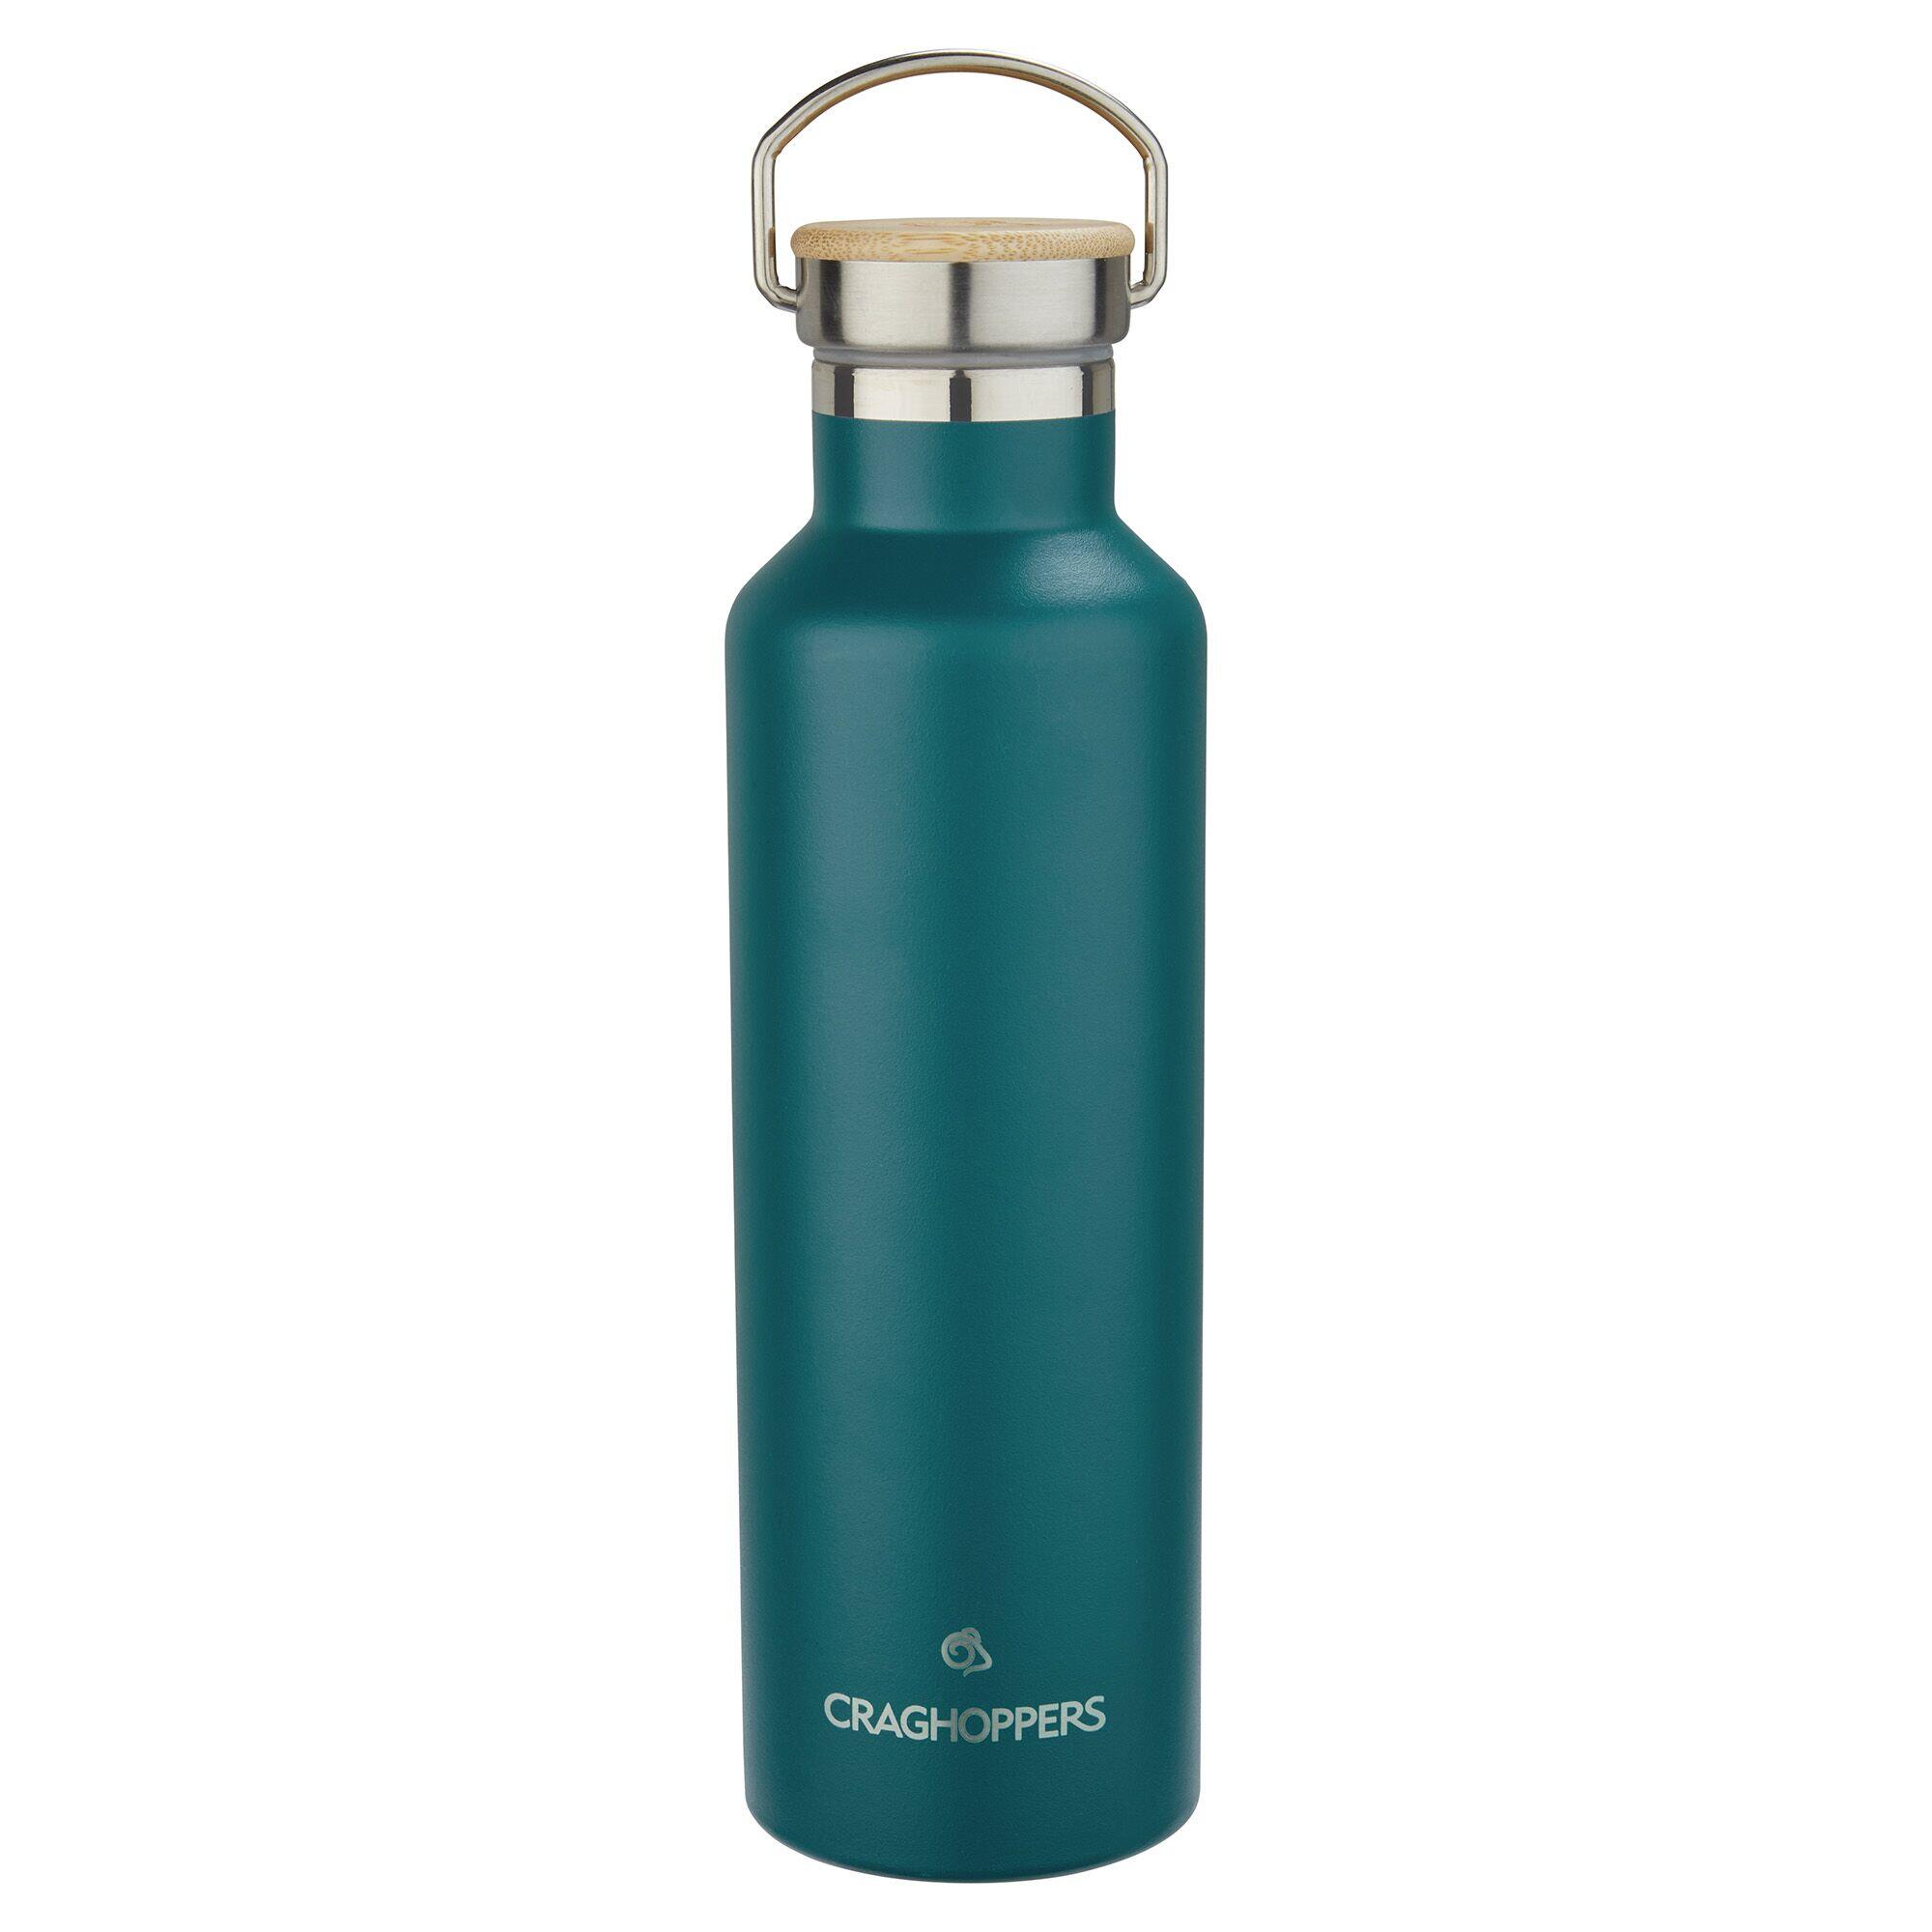 CRAGHOPPERS Insulated Waterbottle